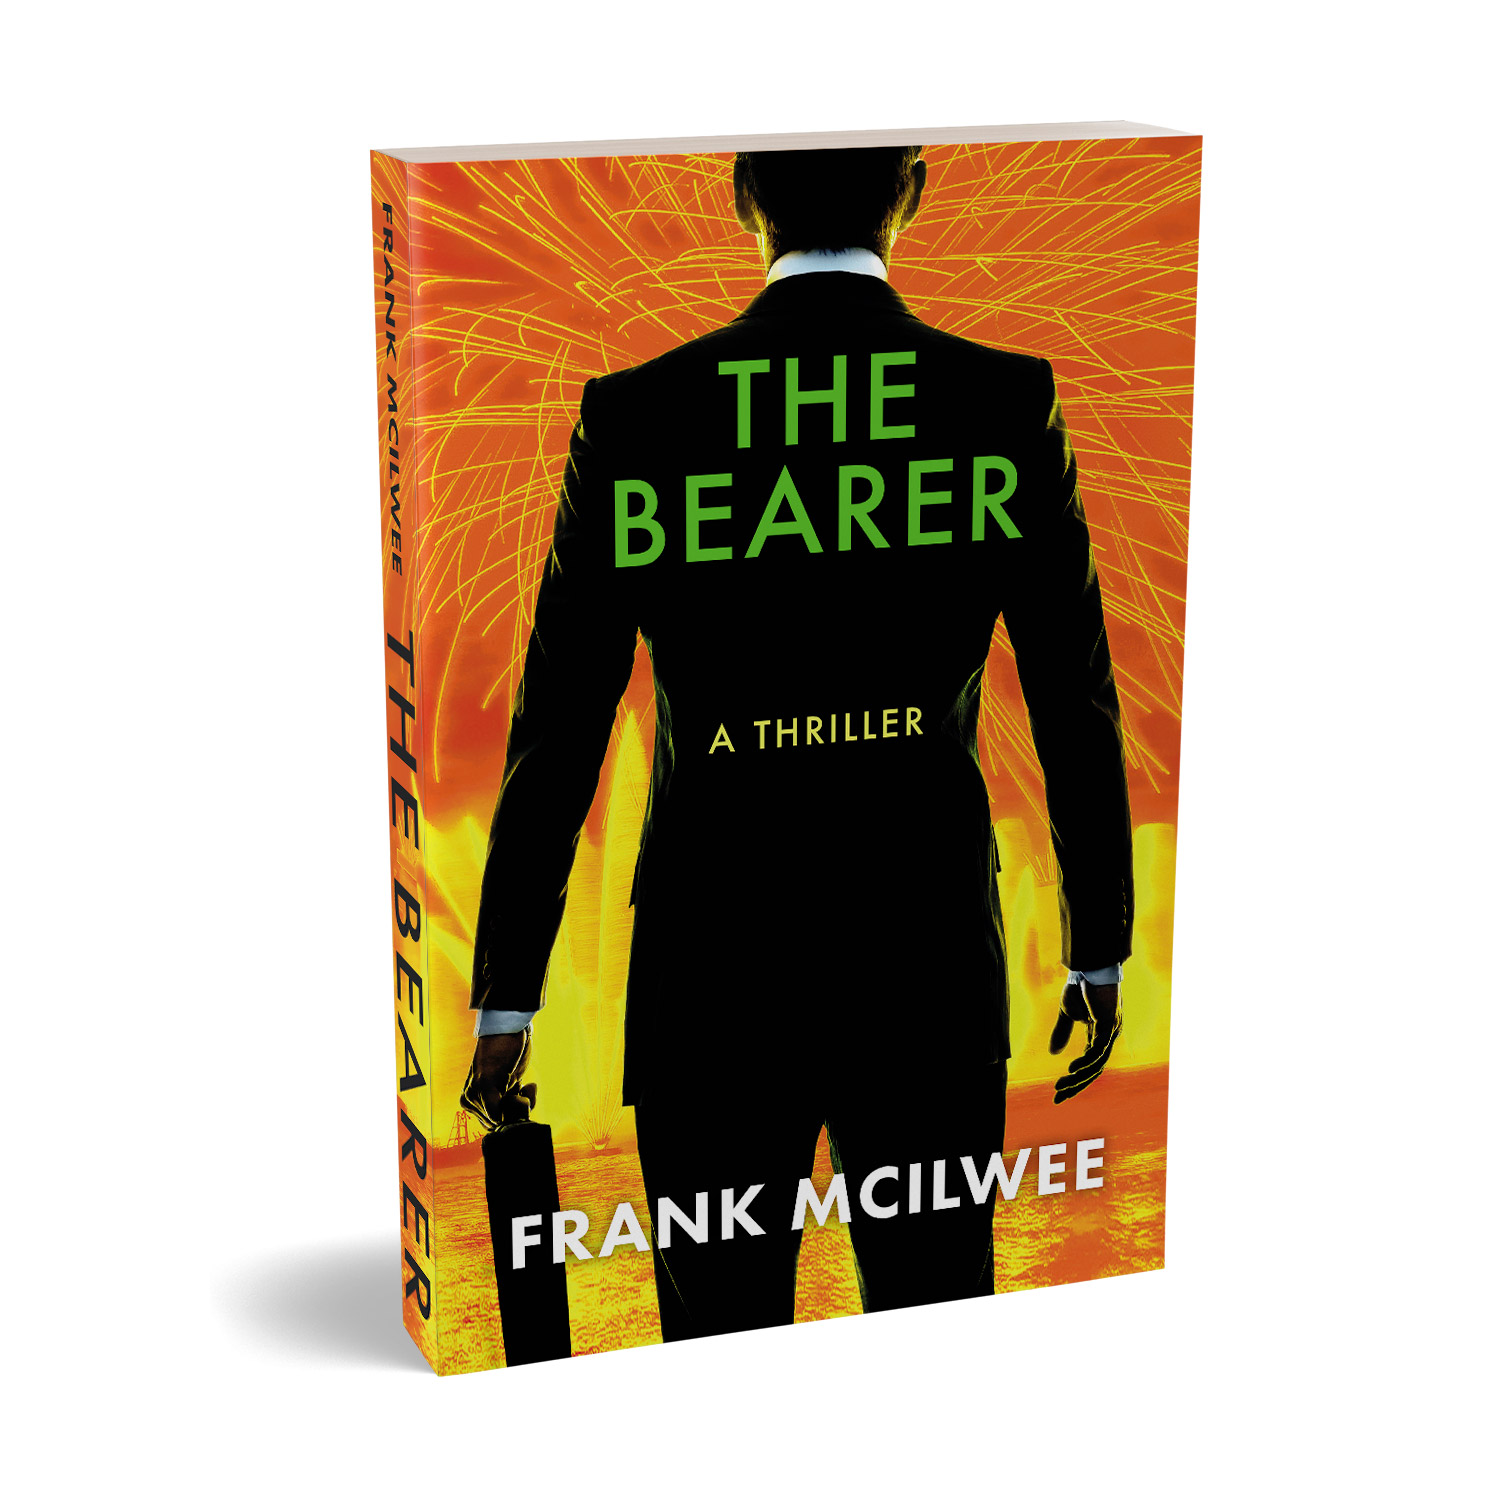 'The Bearer' is a globetrotting thriller by Frank McIlwee. The book cover design is by Mark Thomas. To learn more about what Mark could do for your book, please visit coverness.com.